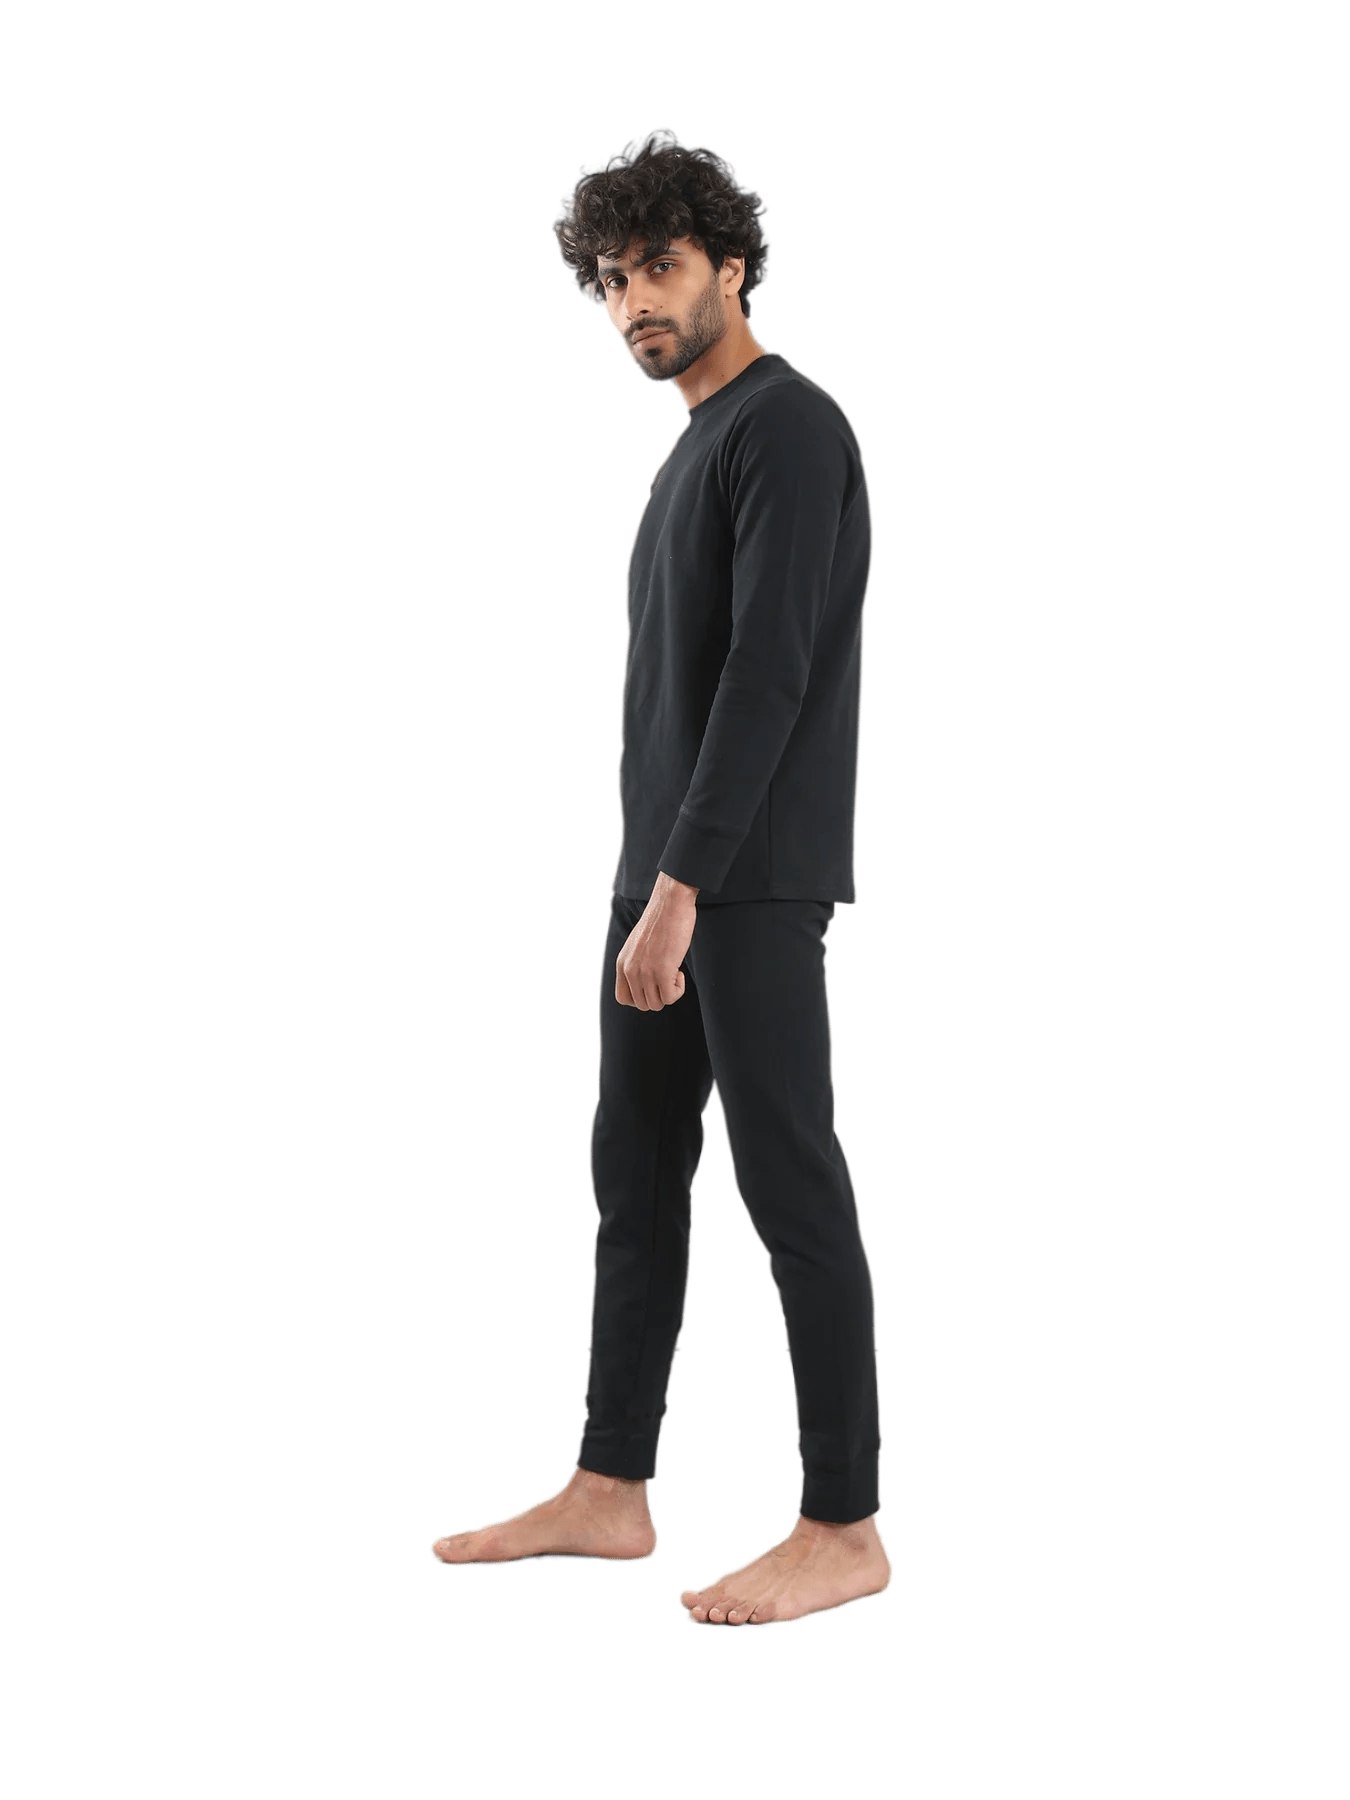 Red Cotton Cozy And Comfortable Thermal Set For Men Padded Inside - Black